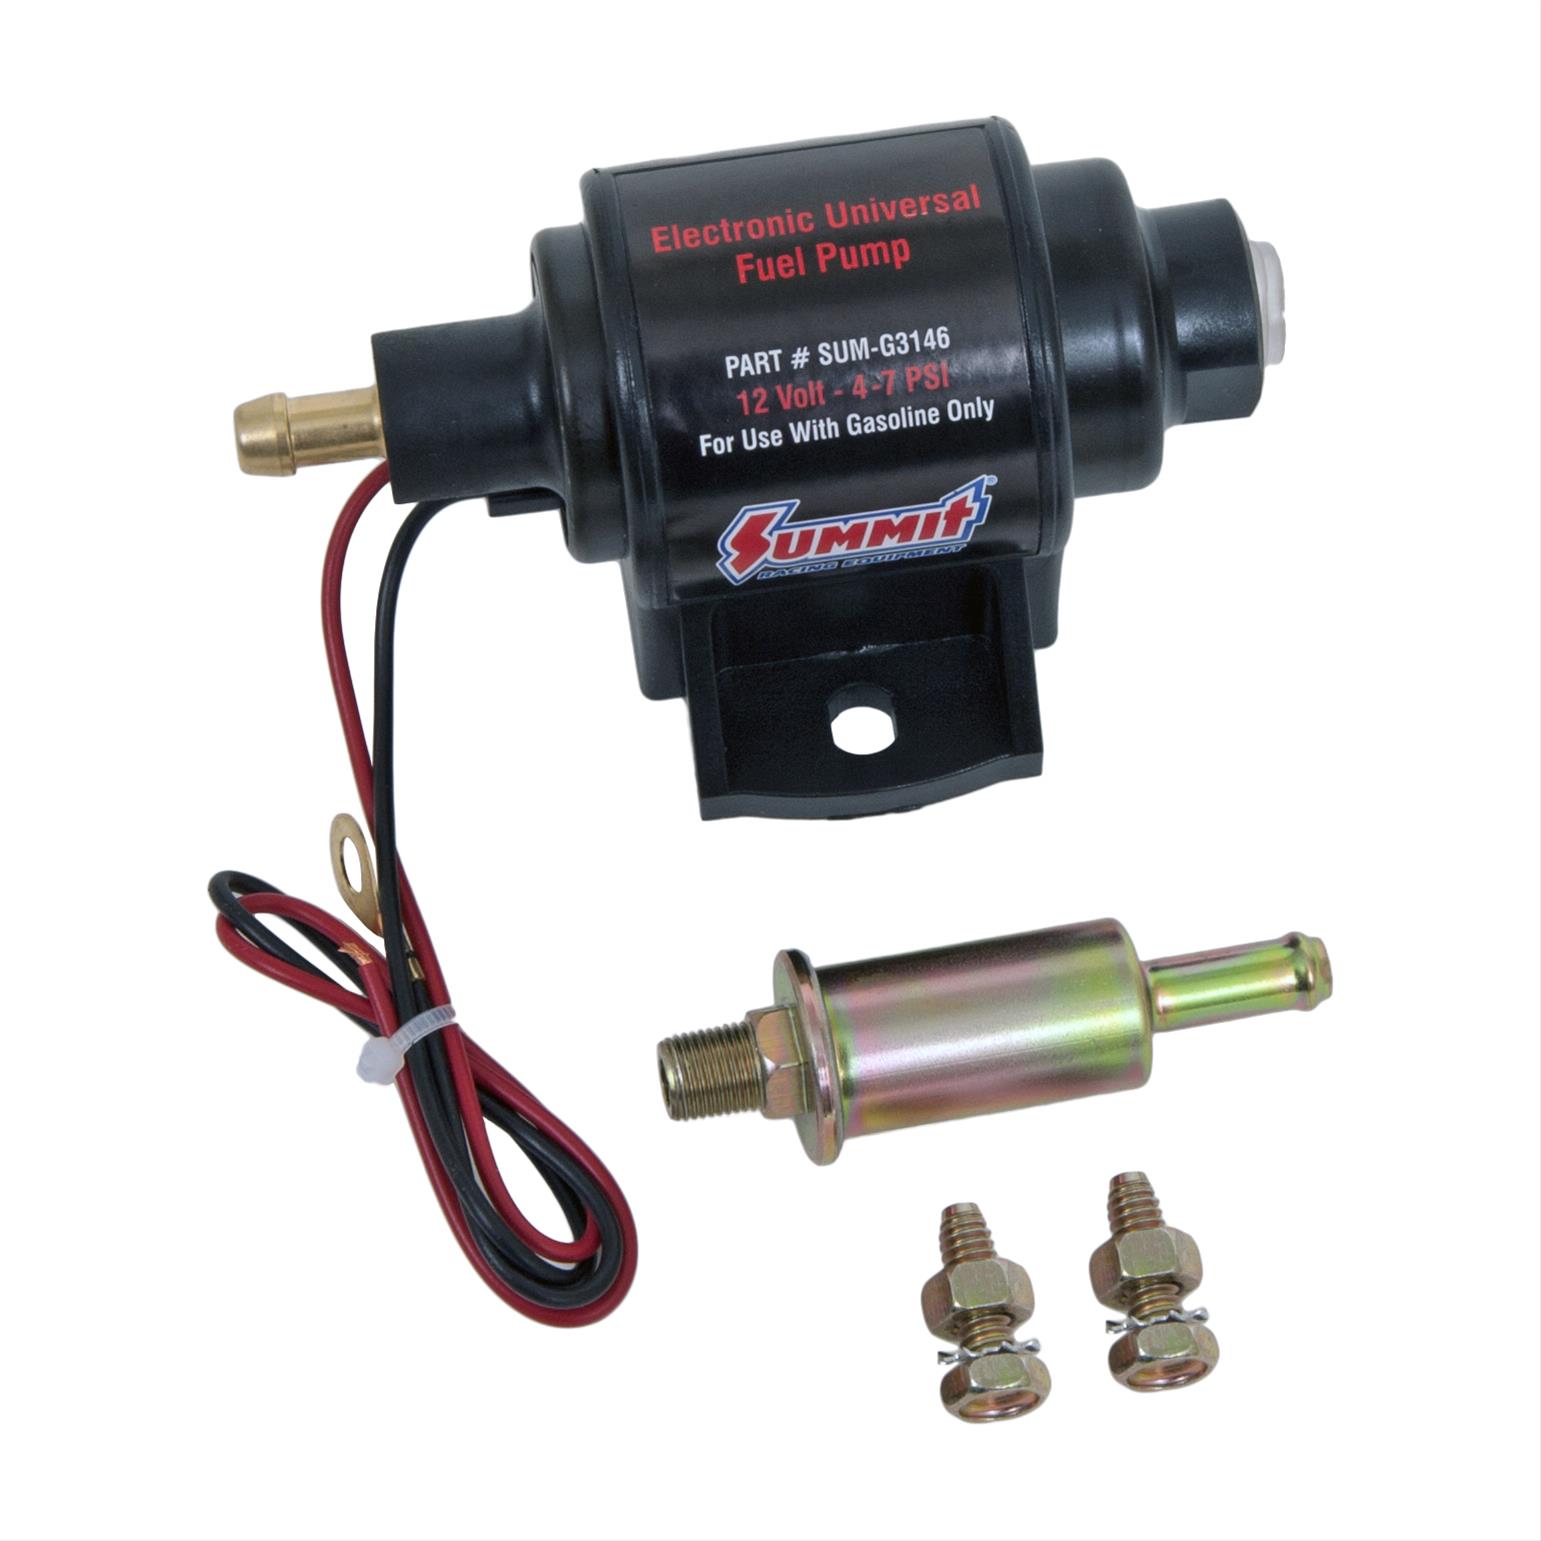 Video: An Introduction to Summit Racing-Brand Universal Electric Fuel Pumps  for Gas & Diesel Applications - OnAllCylinders